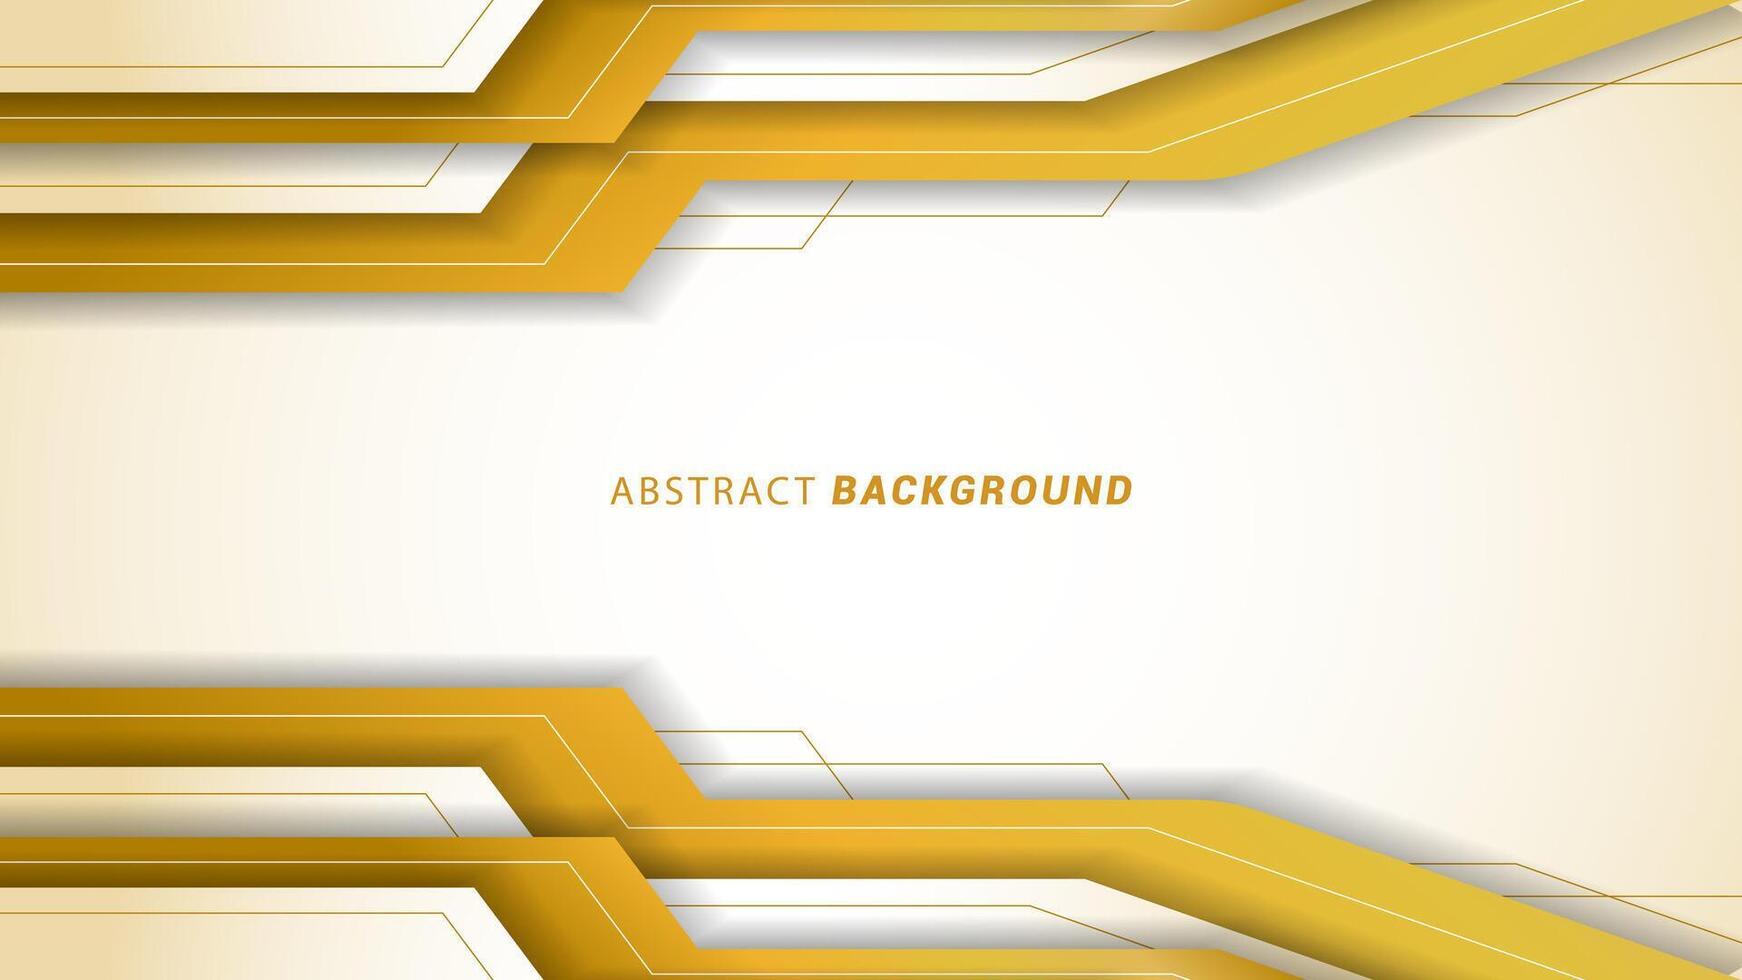 Vector illustration of a luxury abstract background with white and gold frames. Modern elegant background banner with lines.